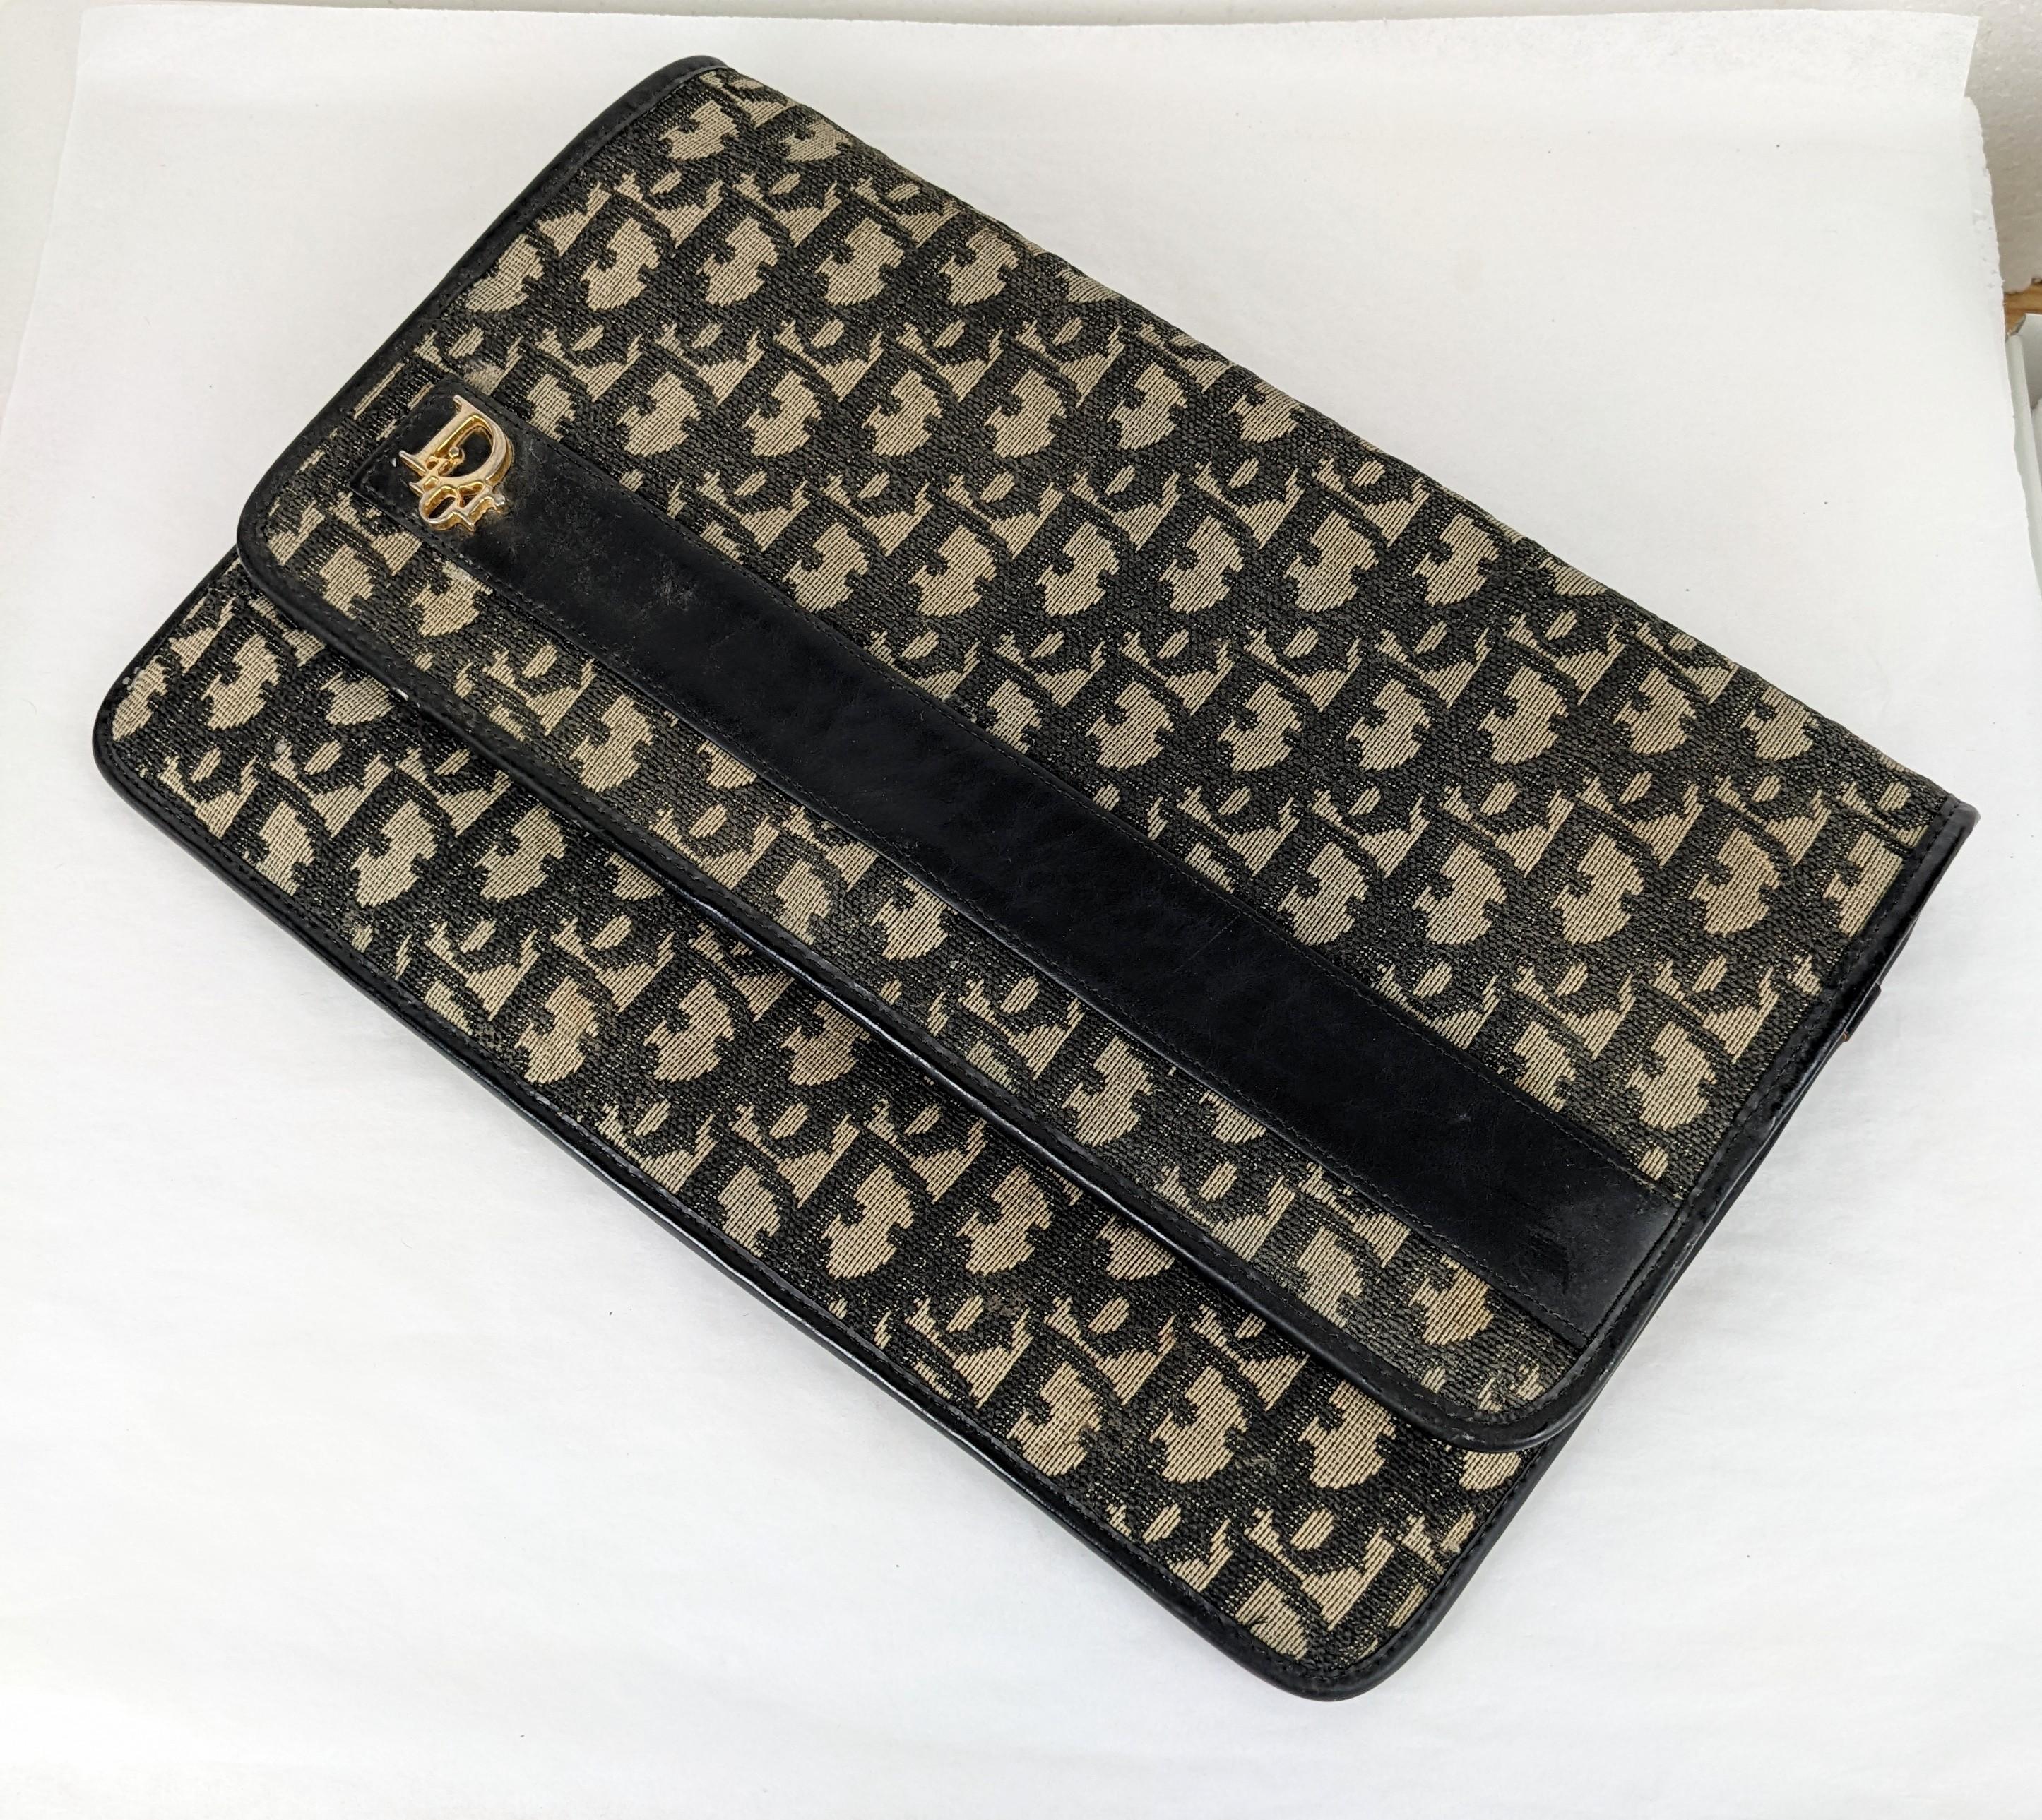 Dior Monogramme Oblique Vintage Clutch completely lined in navy calf leather. The main compartment is leather lined, there is a zippered pocket (unlined) on front. 
Snap closure is frozen so works as a foldover only can likely be released by a